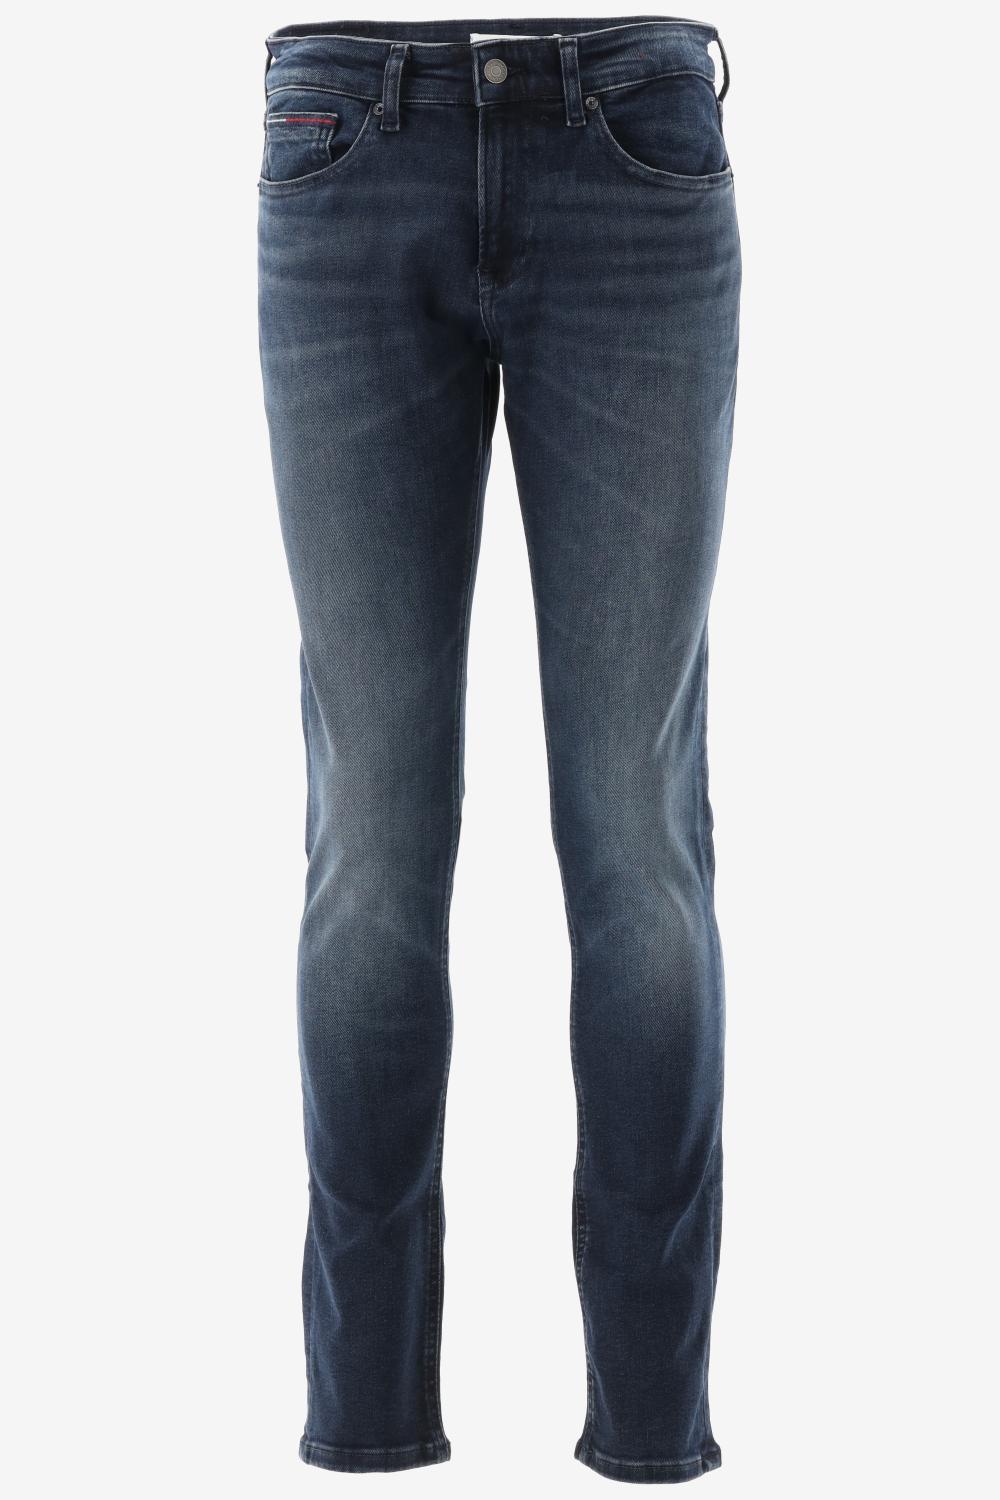 Tommy Jeans Jeans - Slim Fit - Blauw - 31-34